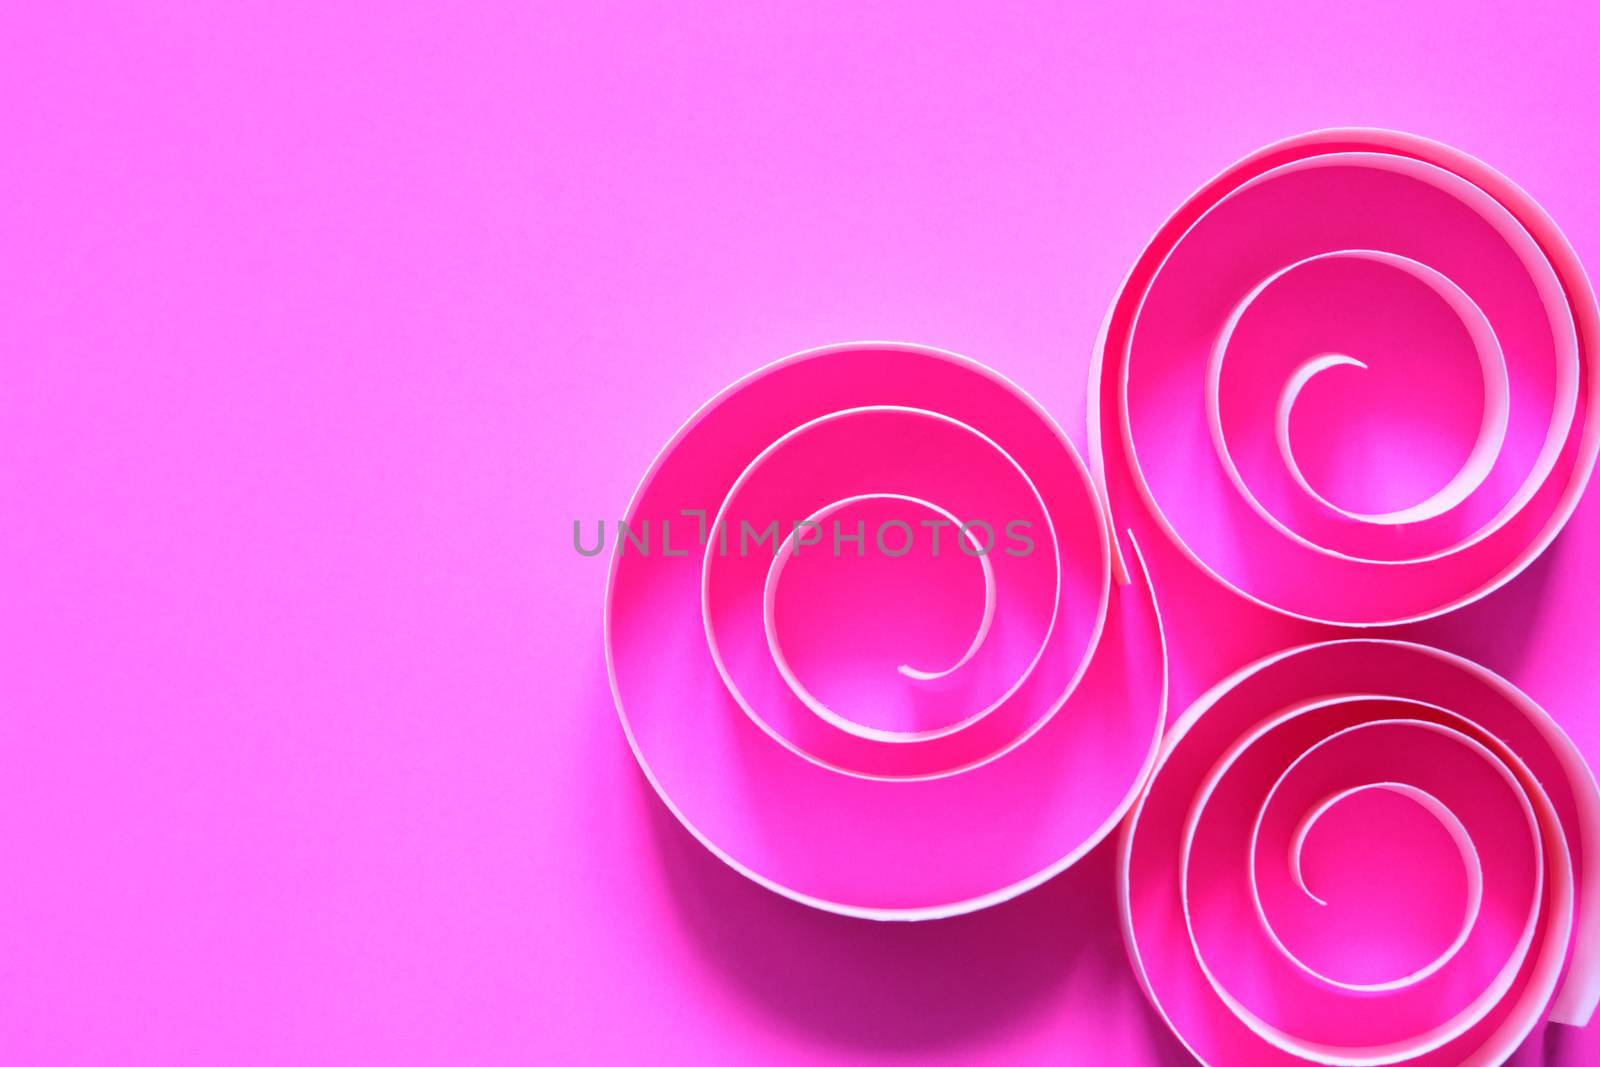 Three purple spiral made from paper on pink background